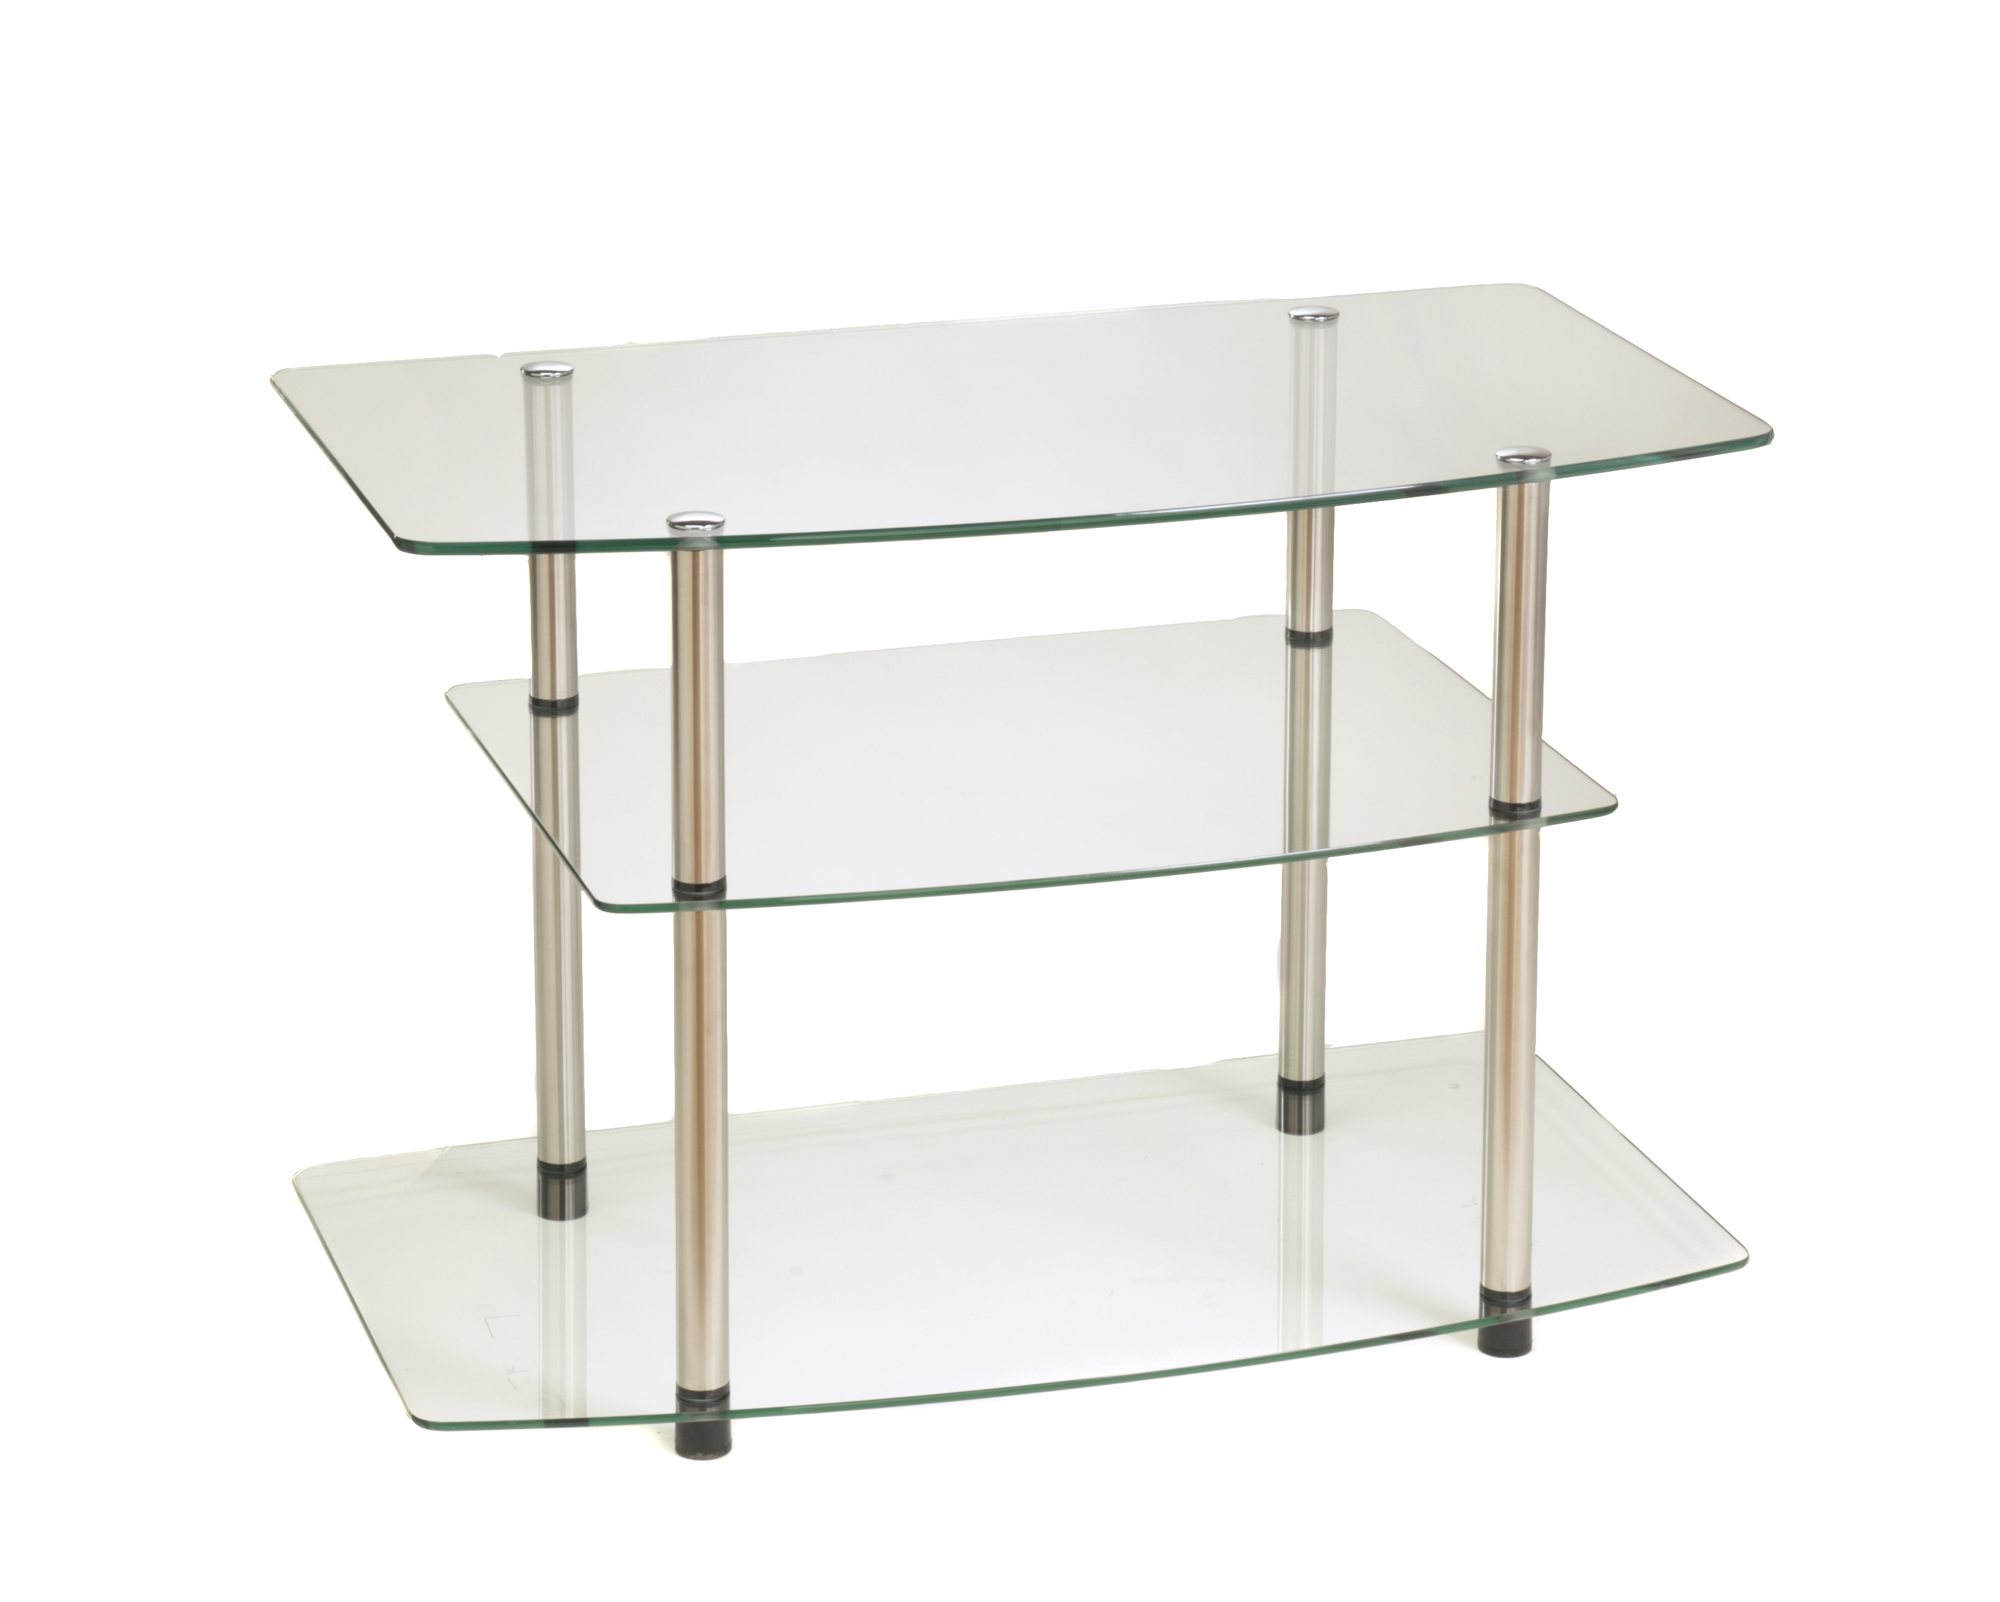 Designs2Go Classic Glass TV Stand - image 3 of 4